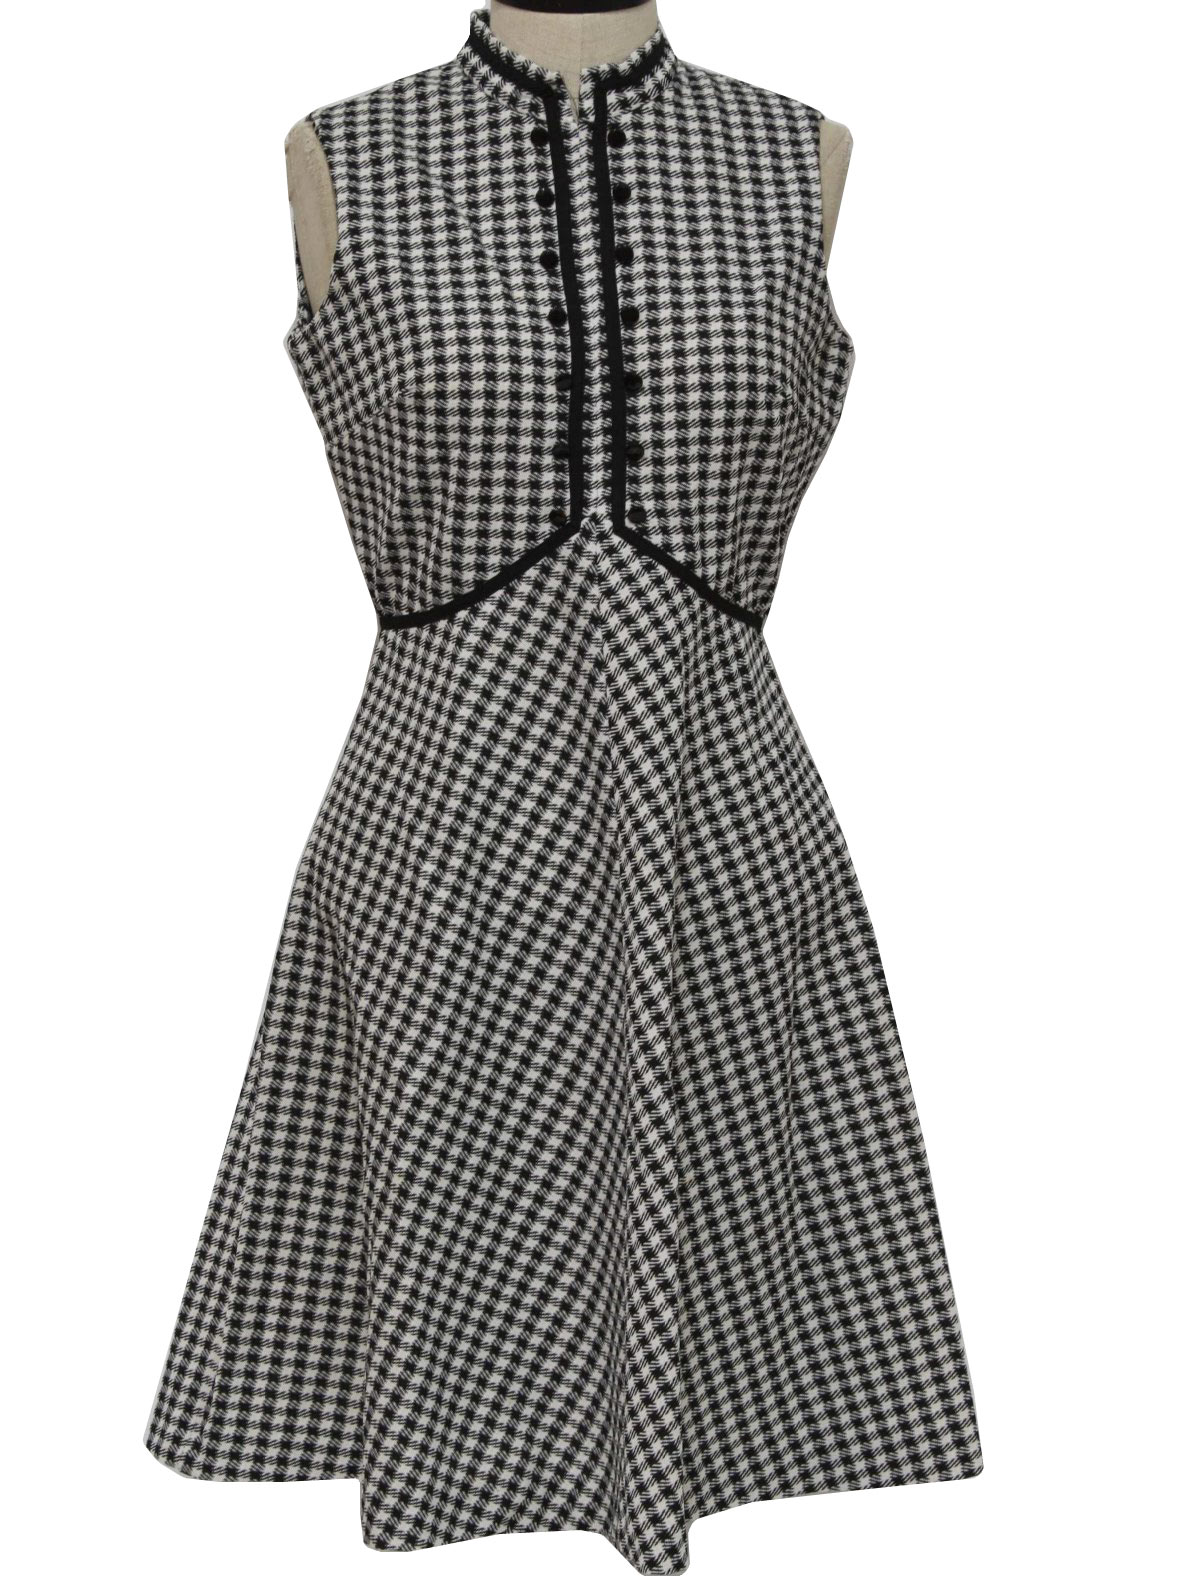 1970's Vintage Bayberry Dress: 70s -Bayberry- Womens black and white ...